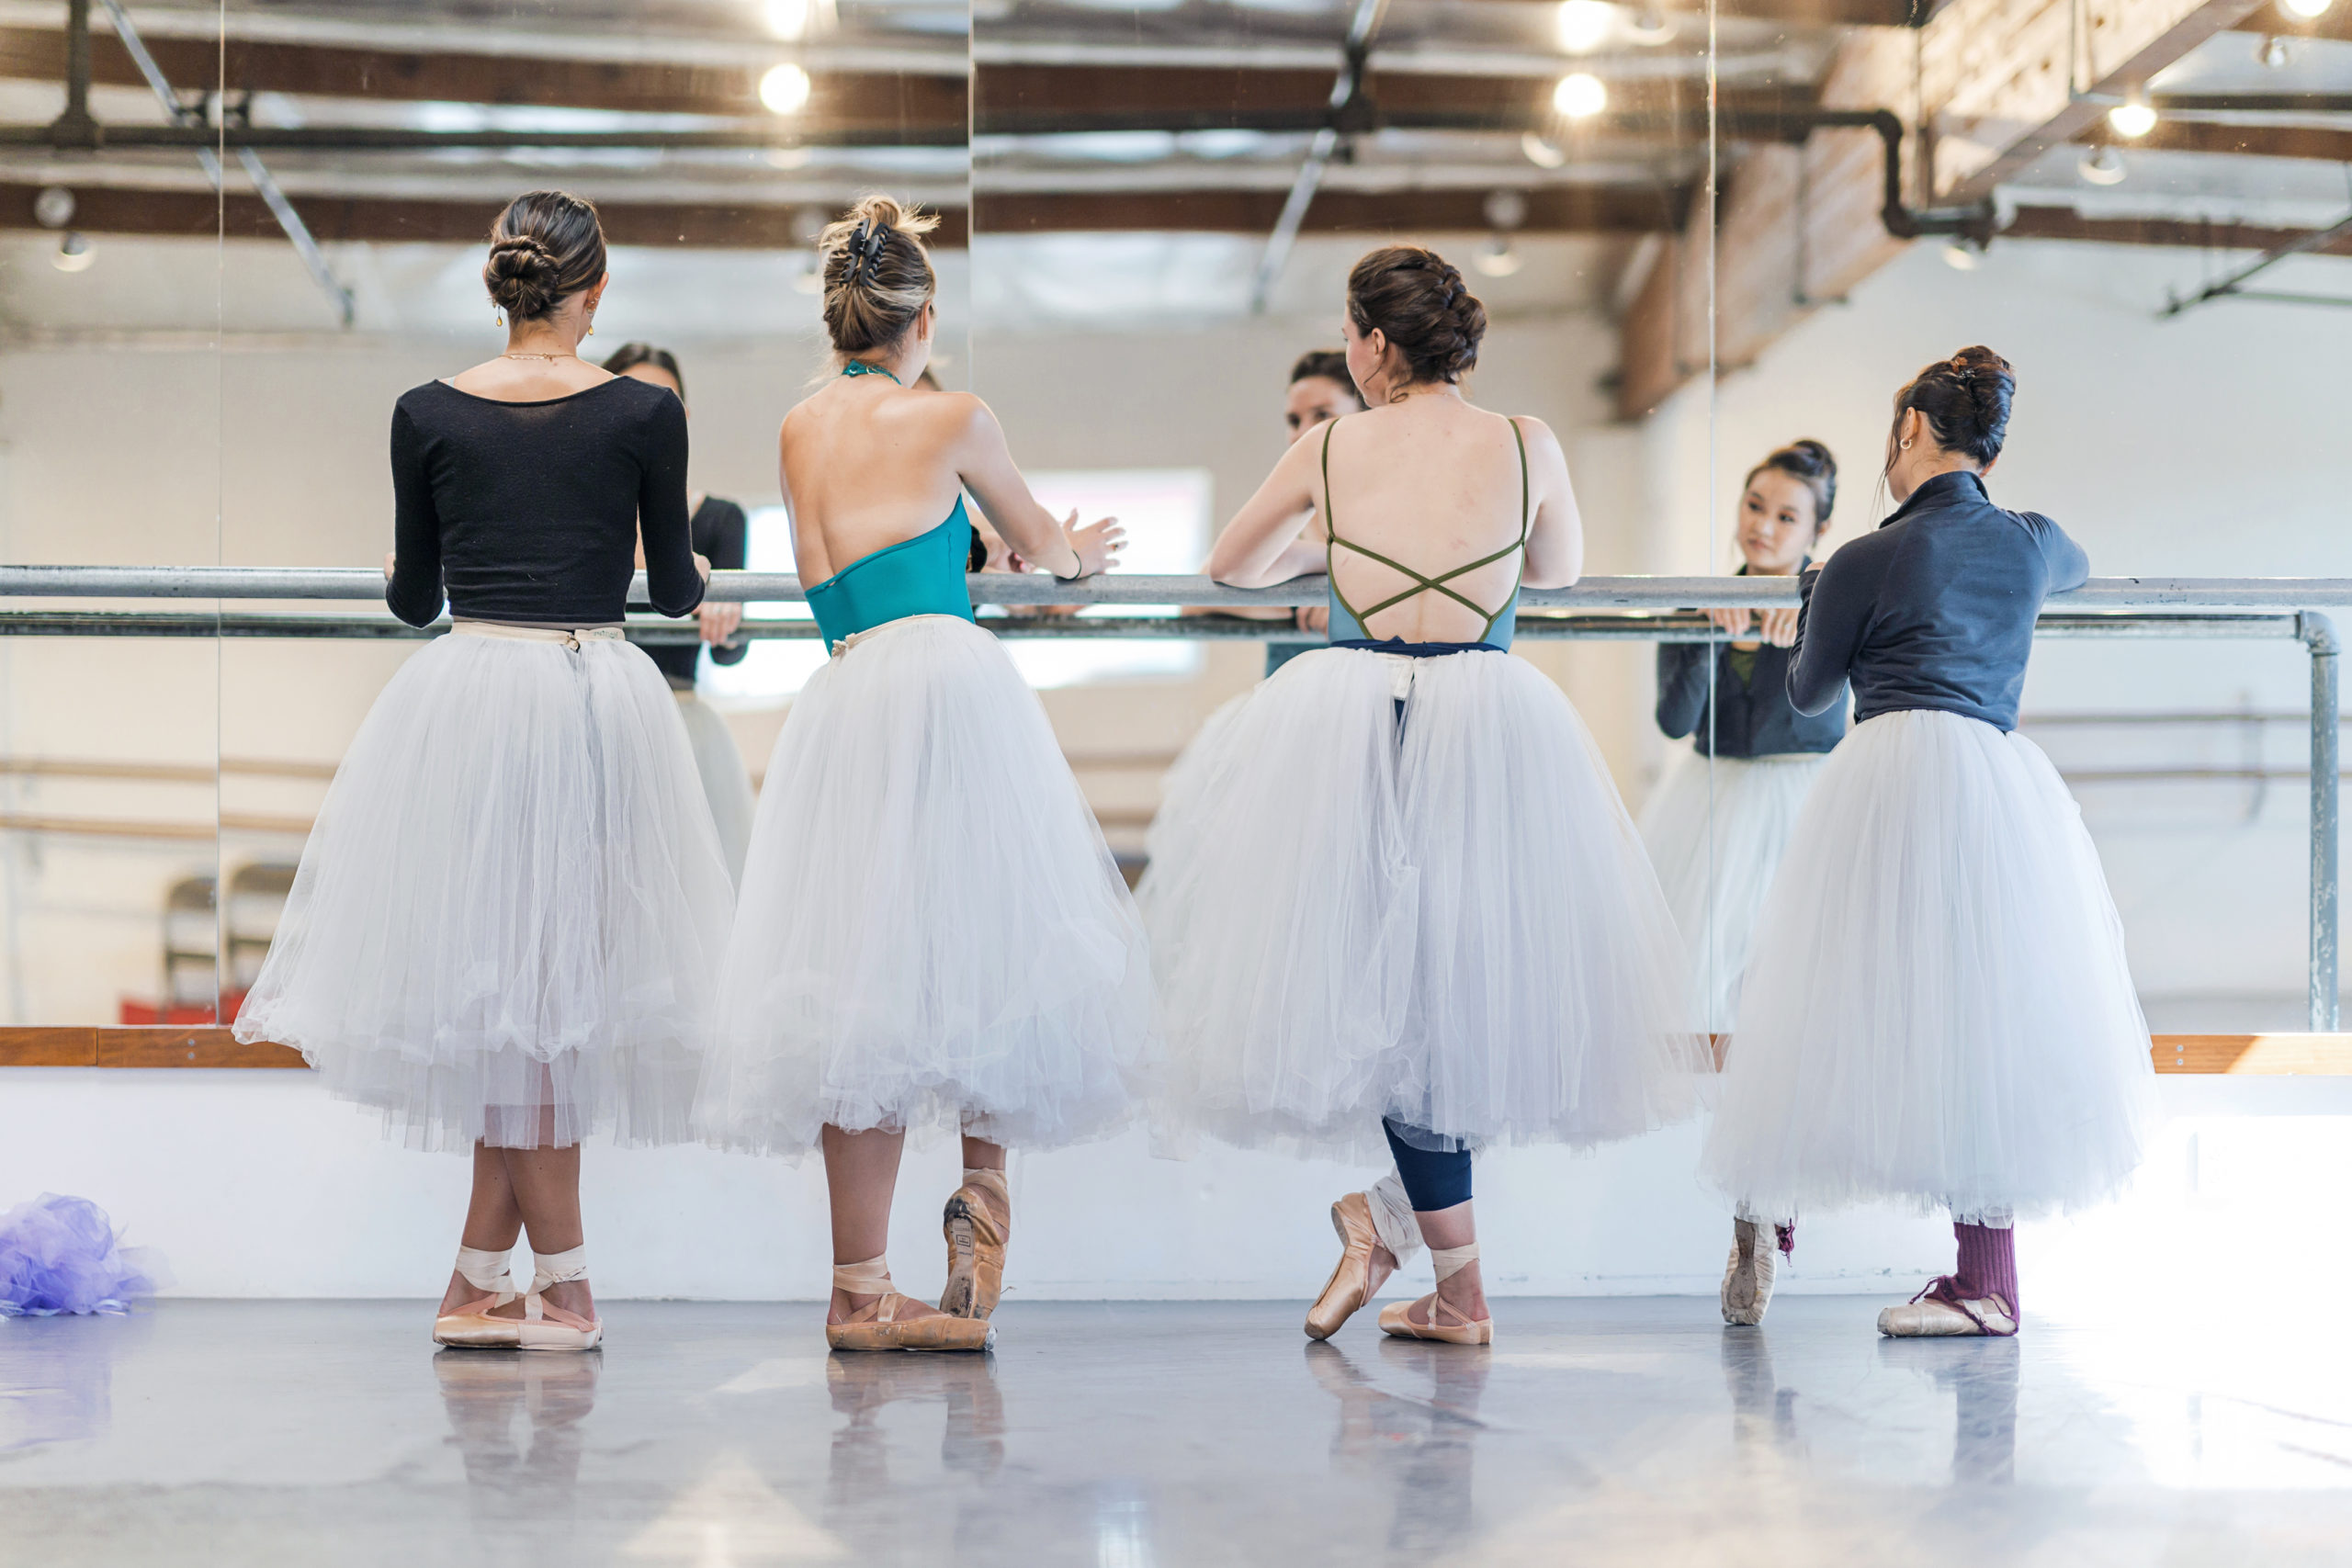 Four female dancers stand in a resting position facing the barre of a dance studio. The wall is a floor-to-ceiling mirror. They each wear different style leotards but all have matching white Romantic-length practice tutus.